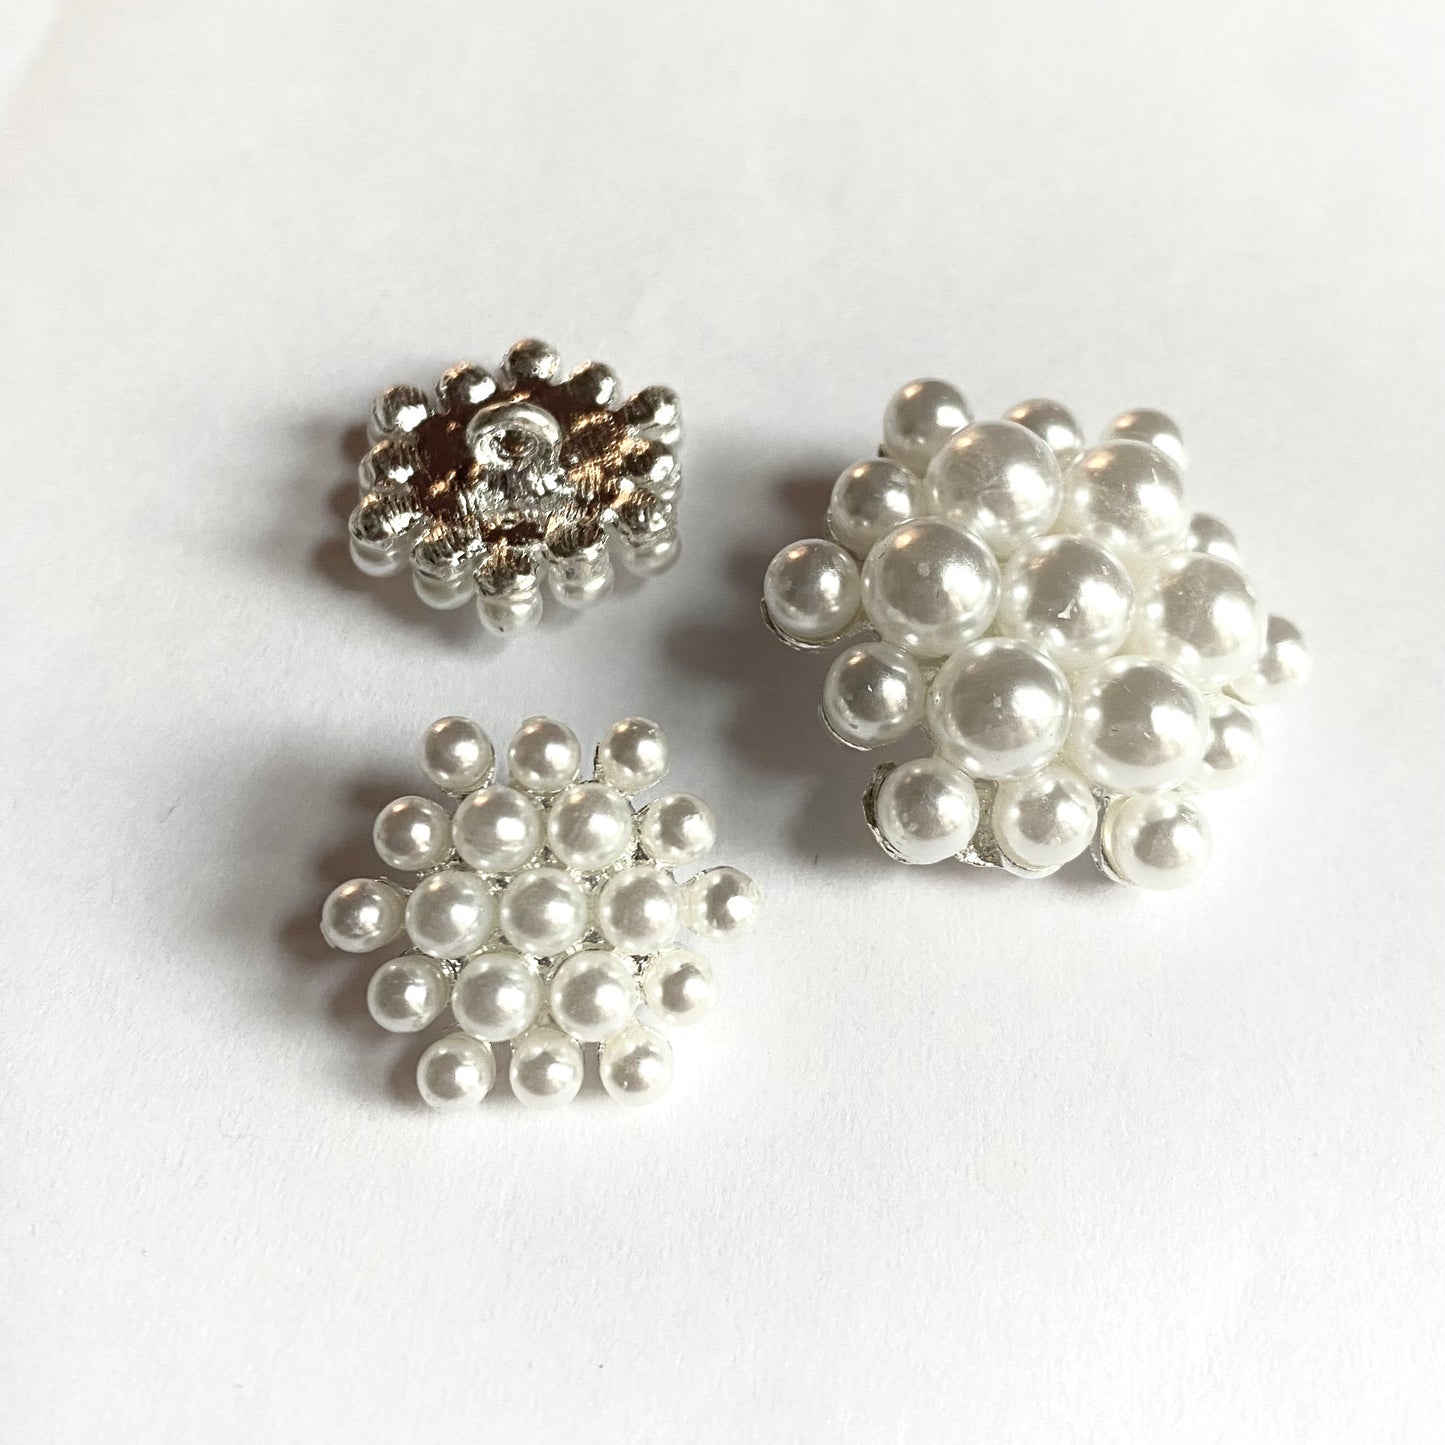 Pearl button 20-30 mm